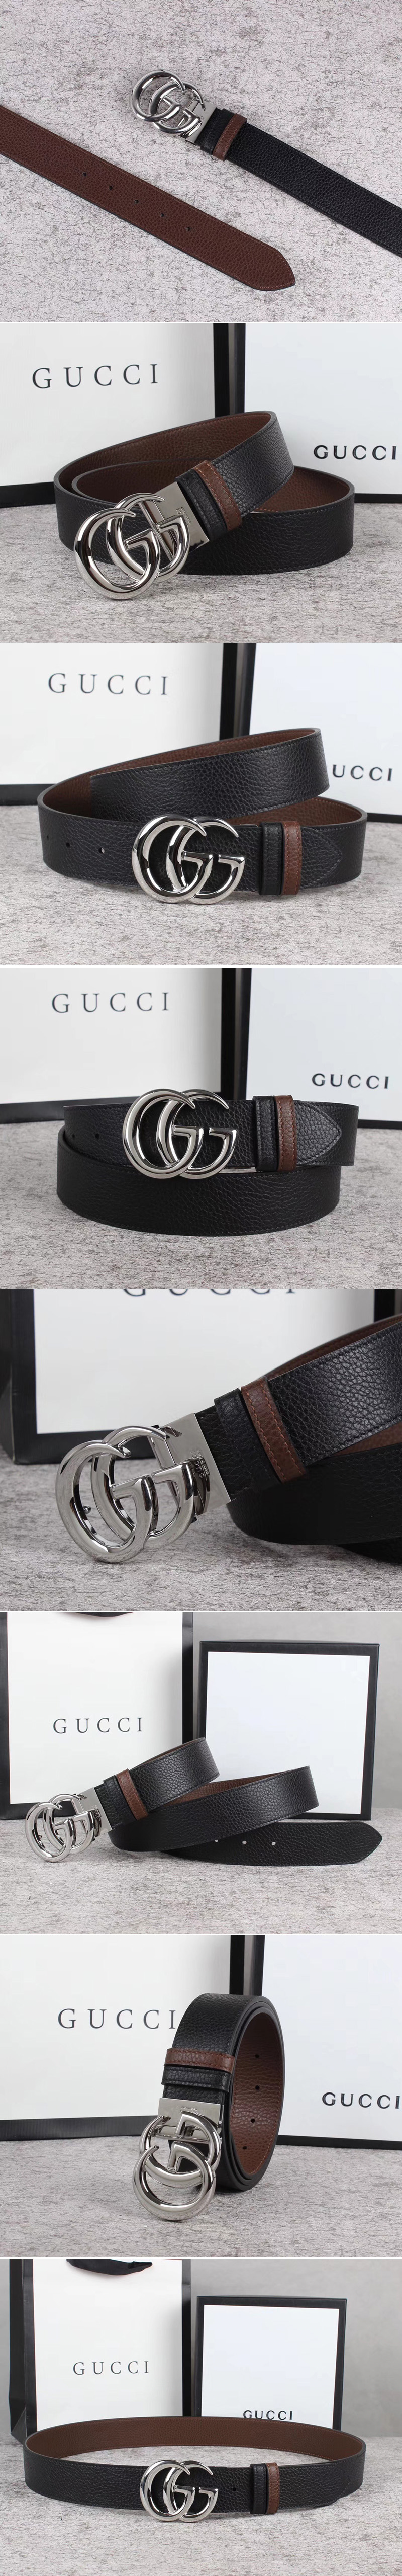 Replica Men's Gucci 40mm Reversible leather belt with Shiny Silver Double G buckle in Black Leather